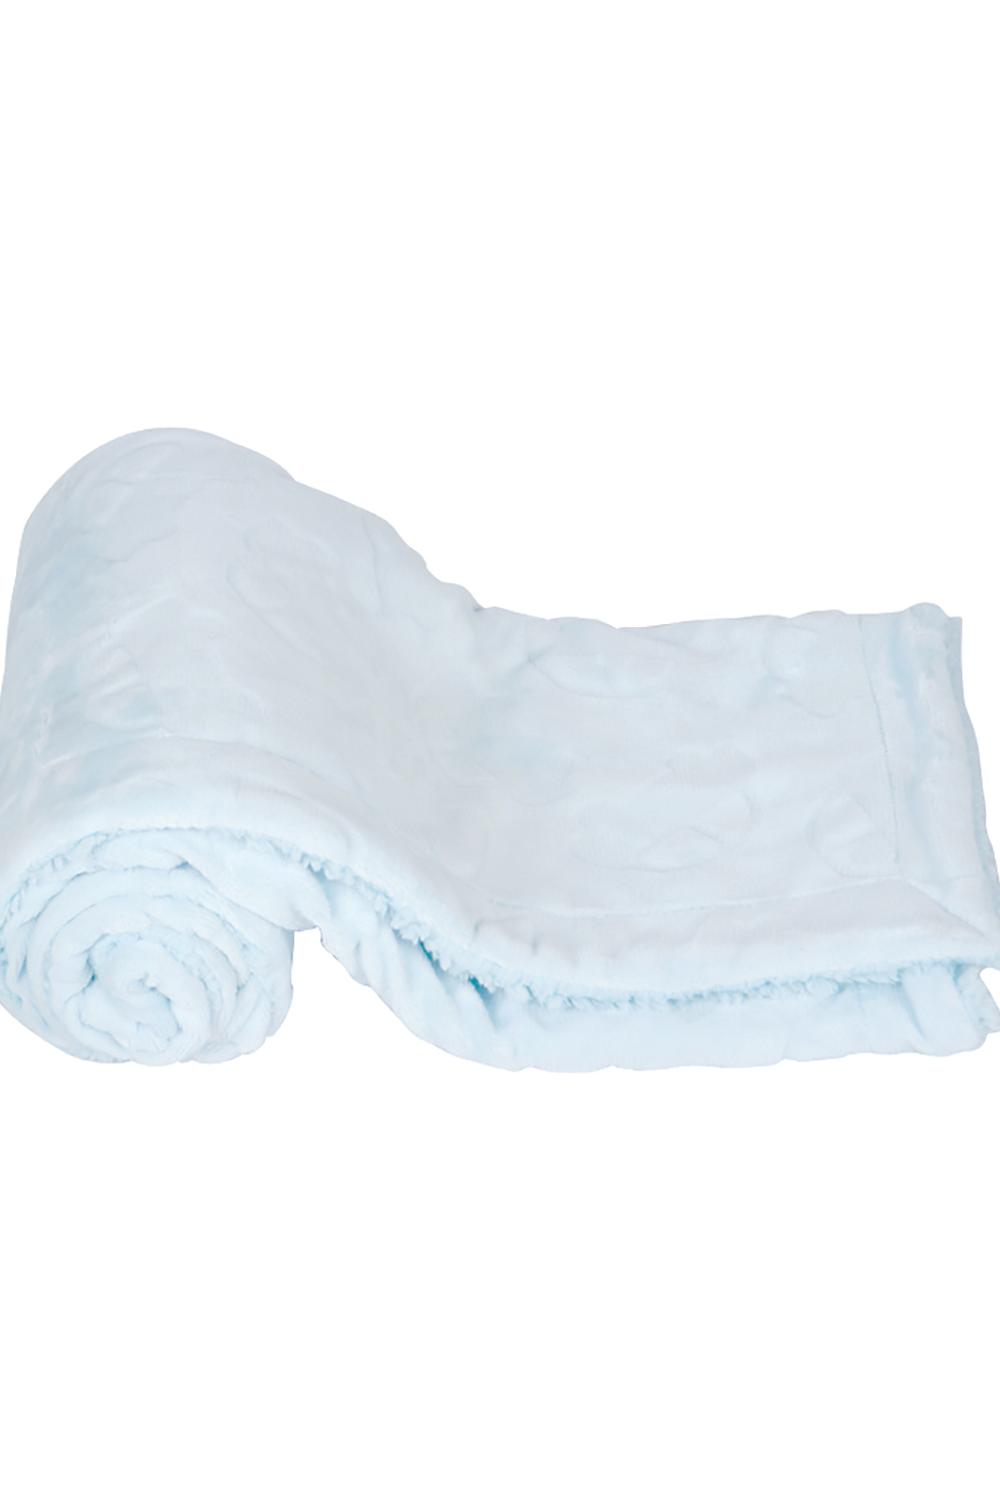 Light Blue Double Layered Blanket with Embossed Pr